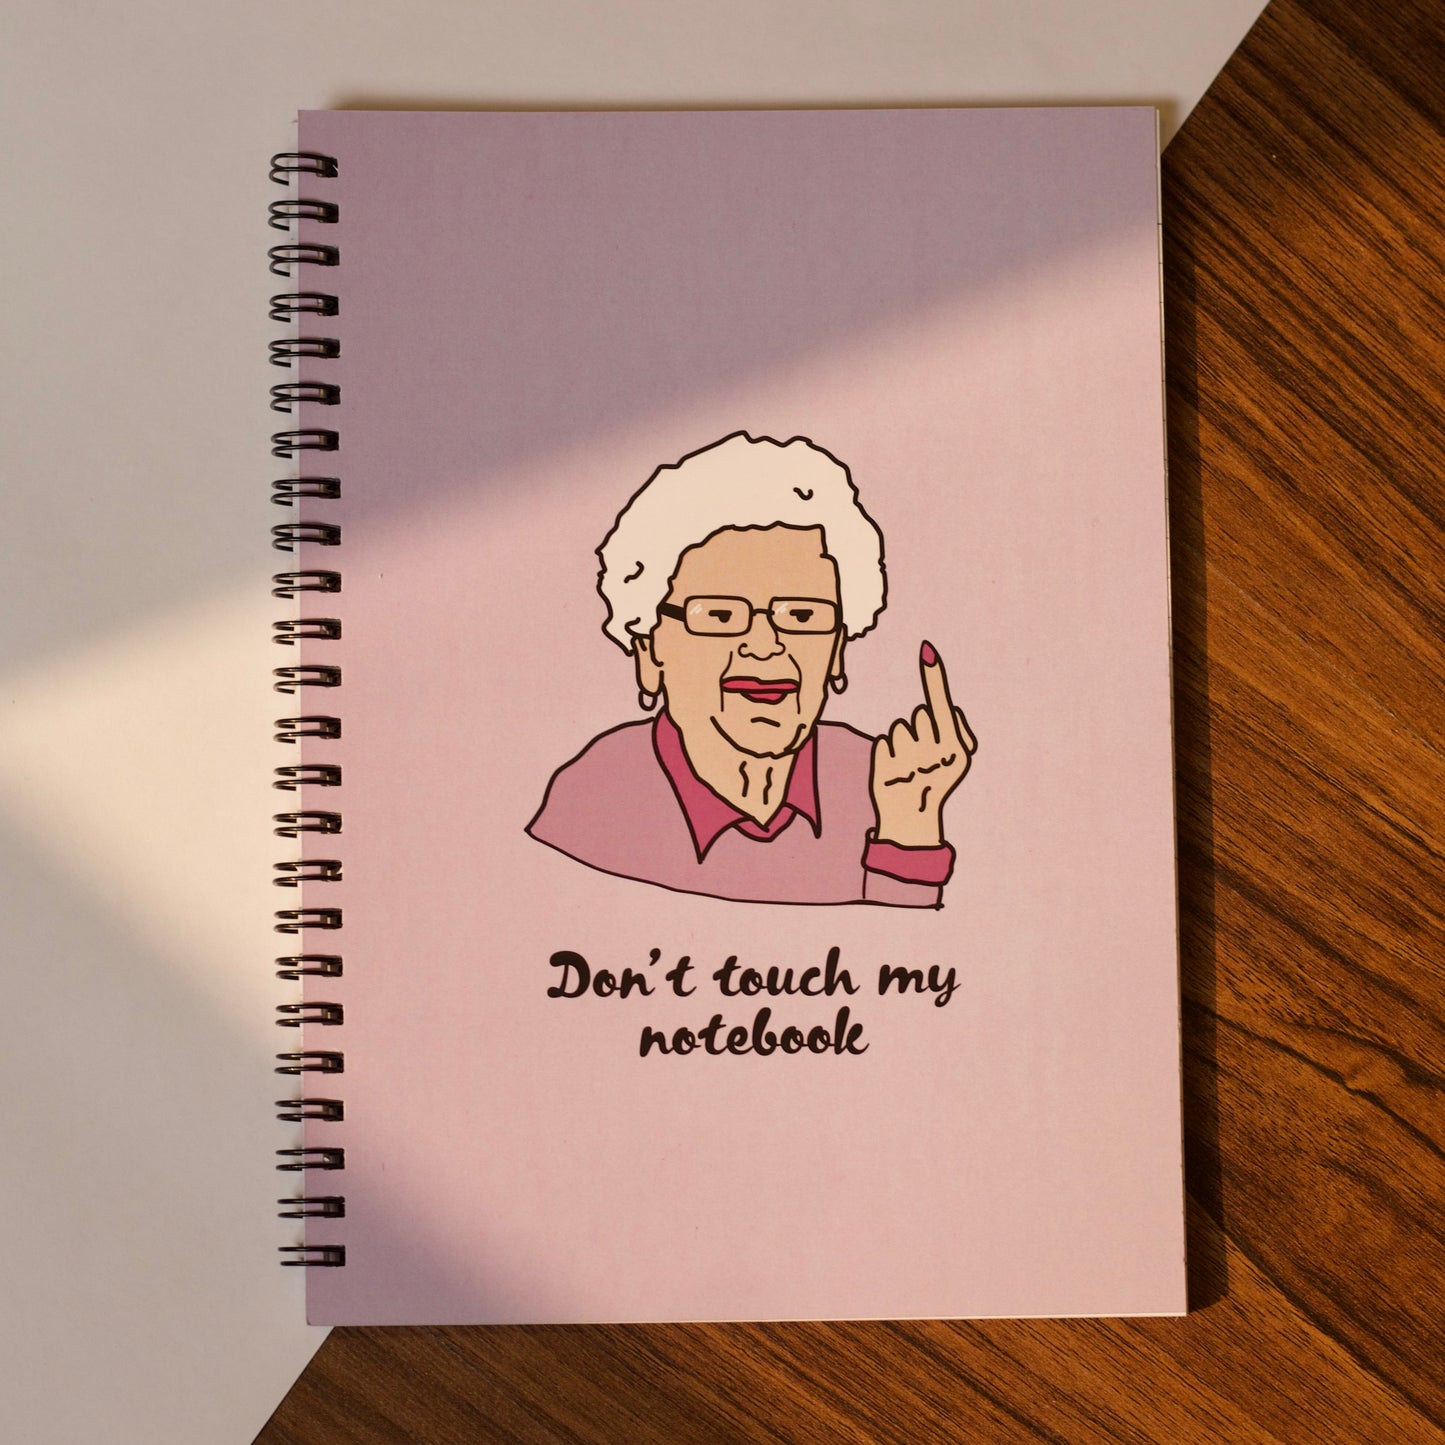 Don’t touch my Notebook